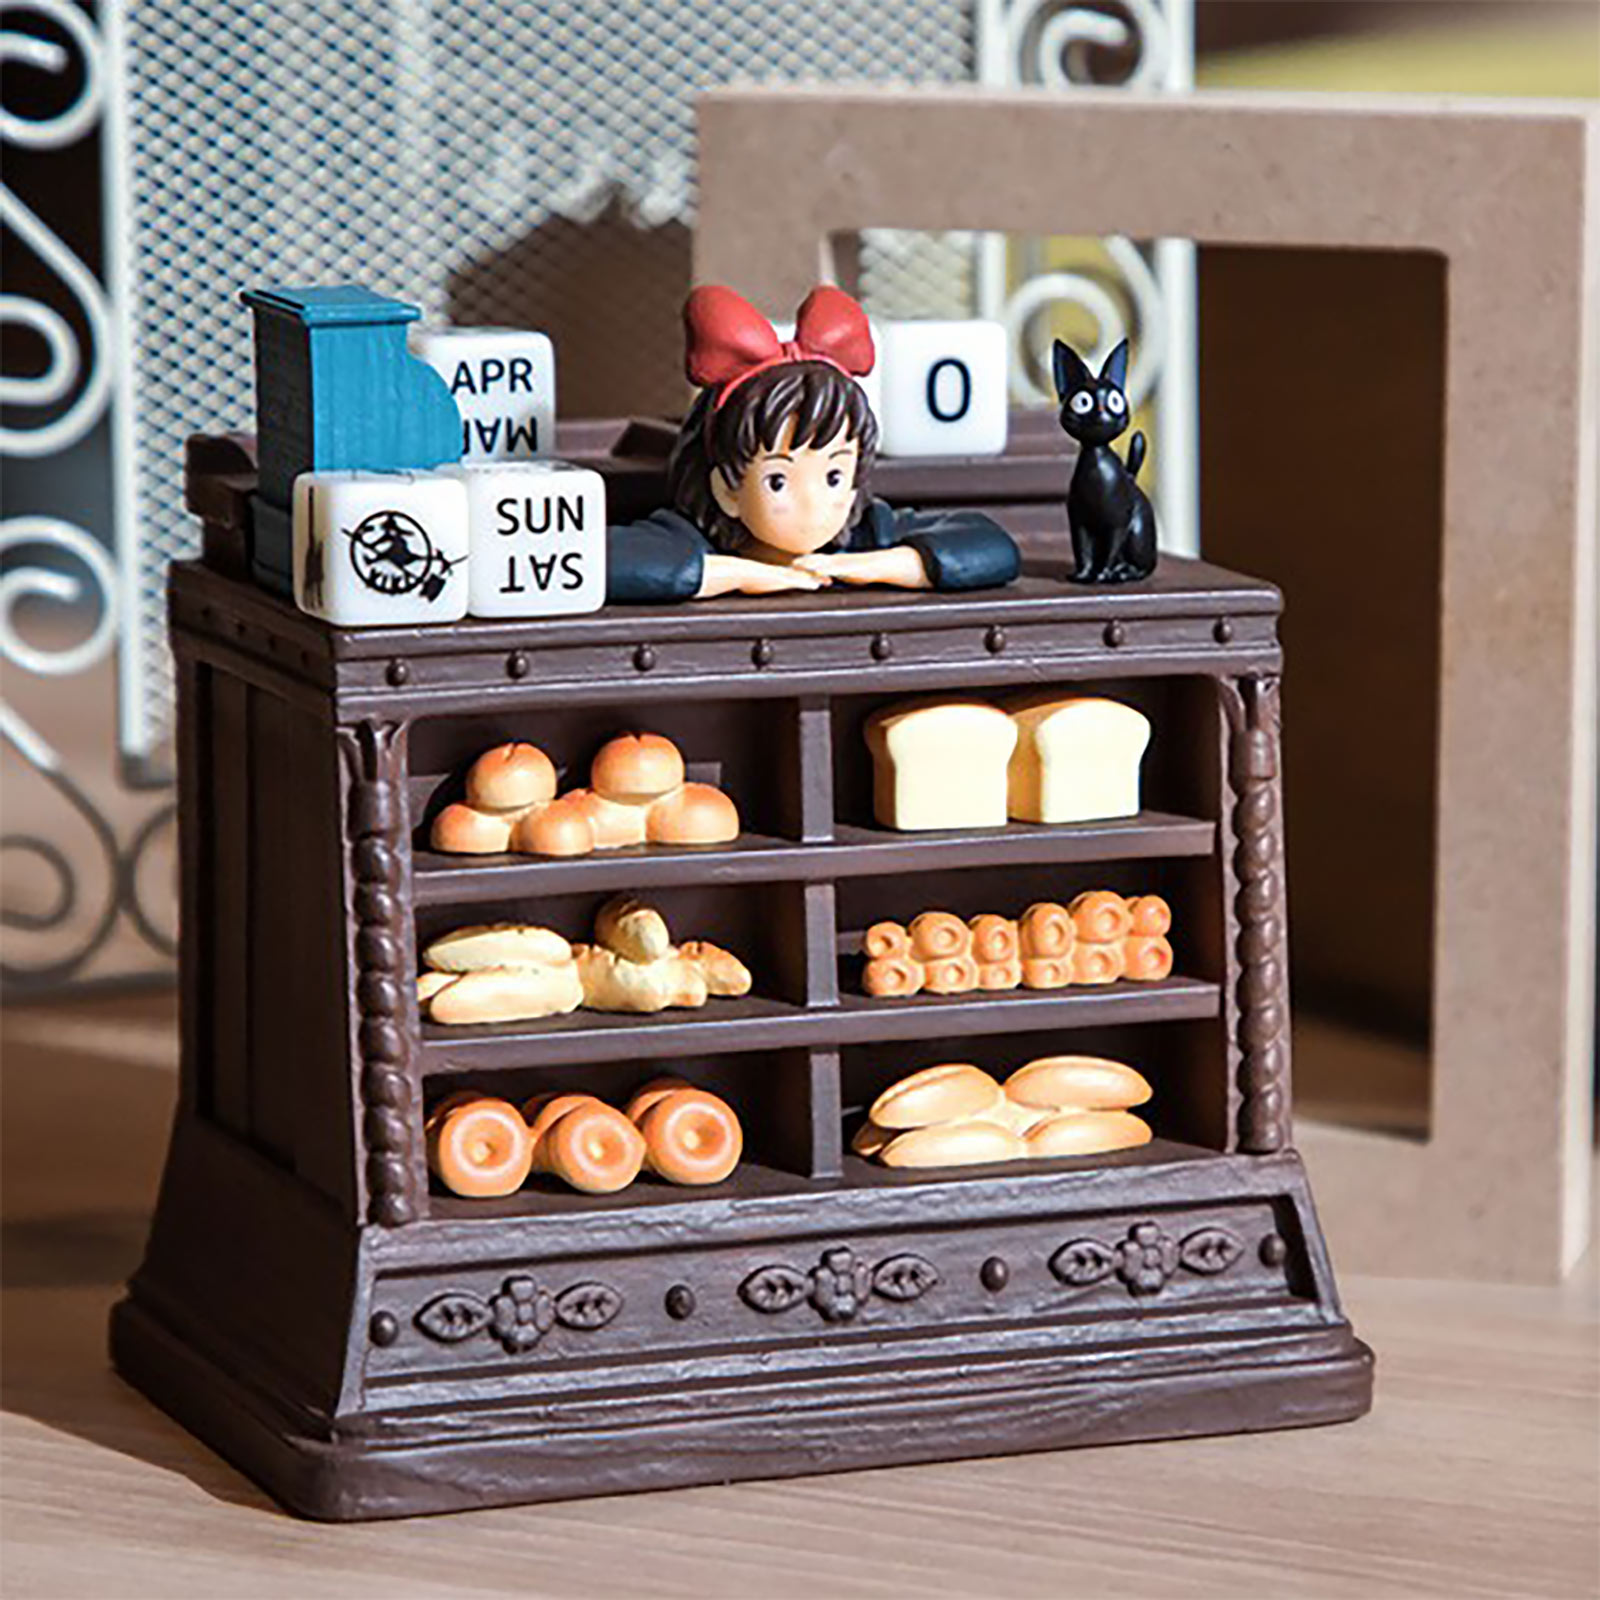 Kiki's Little Delivery Service - Bakery 3D Annual Calendar